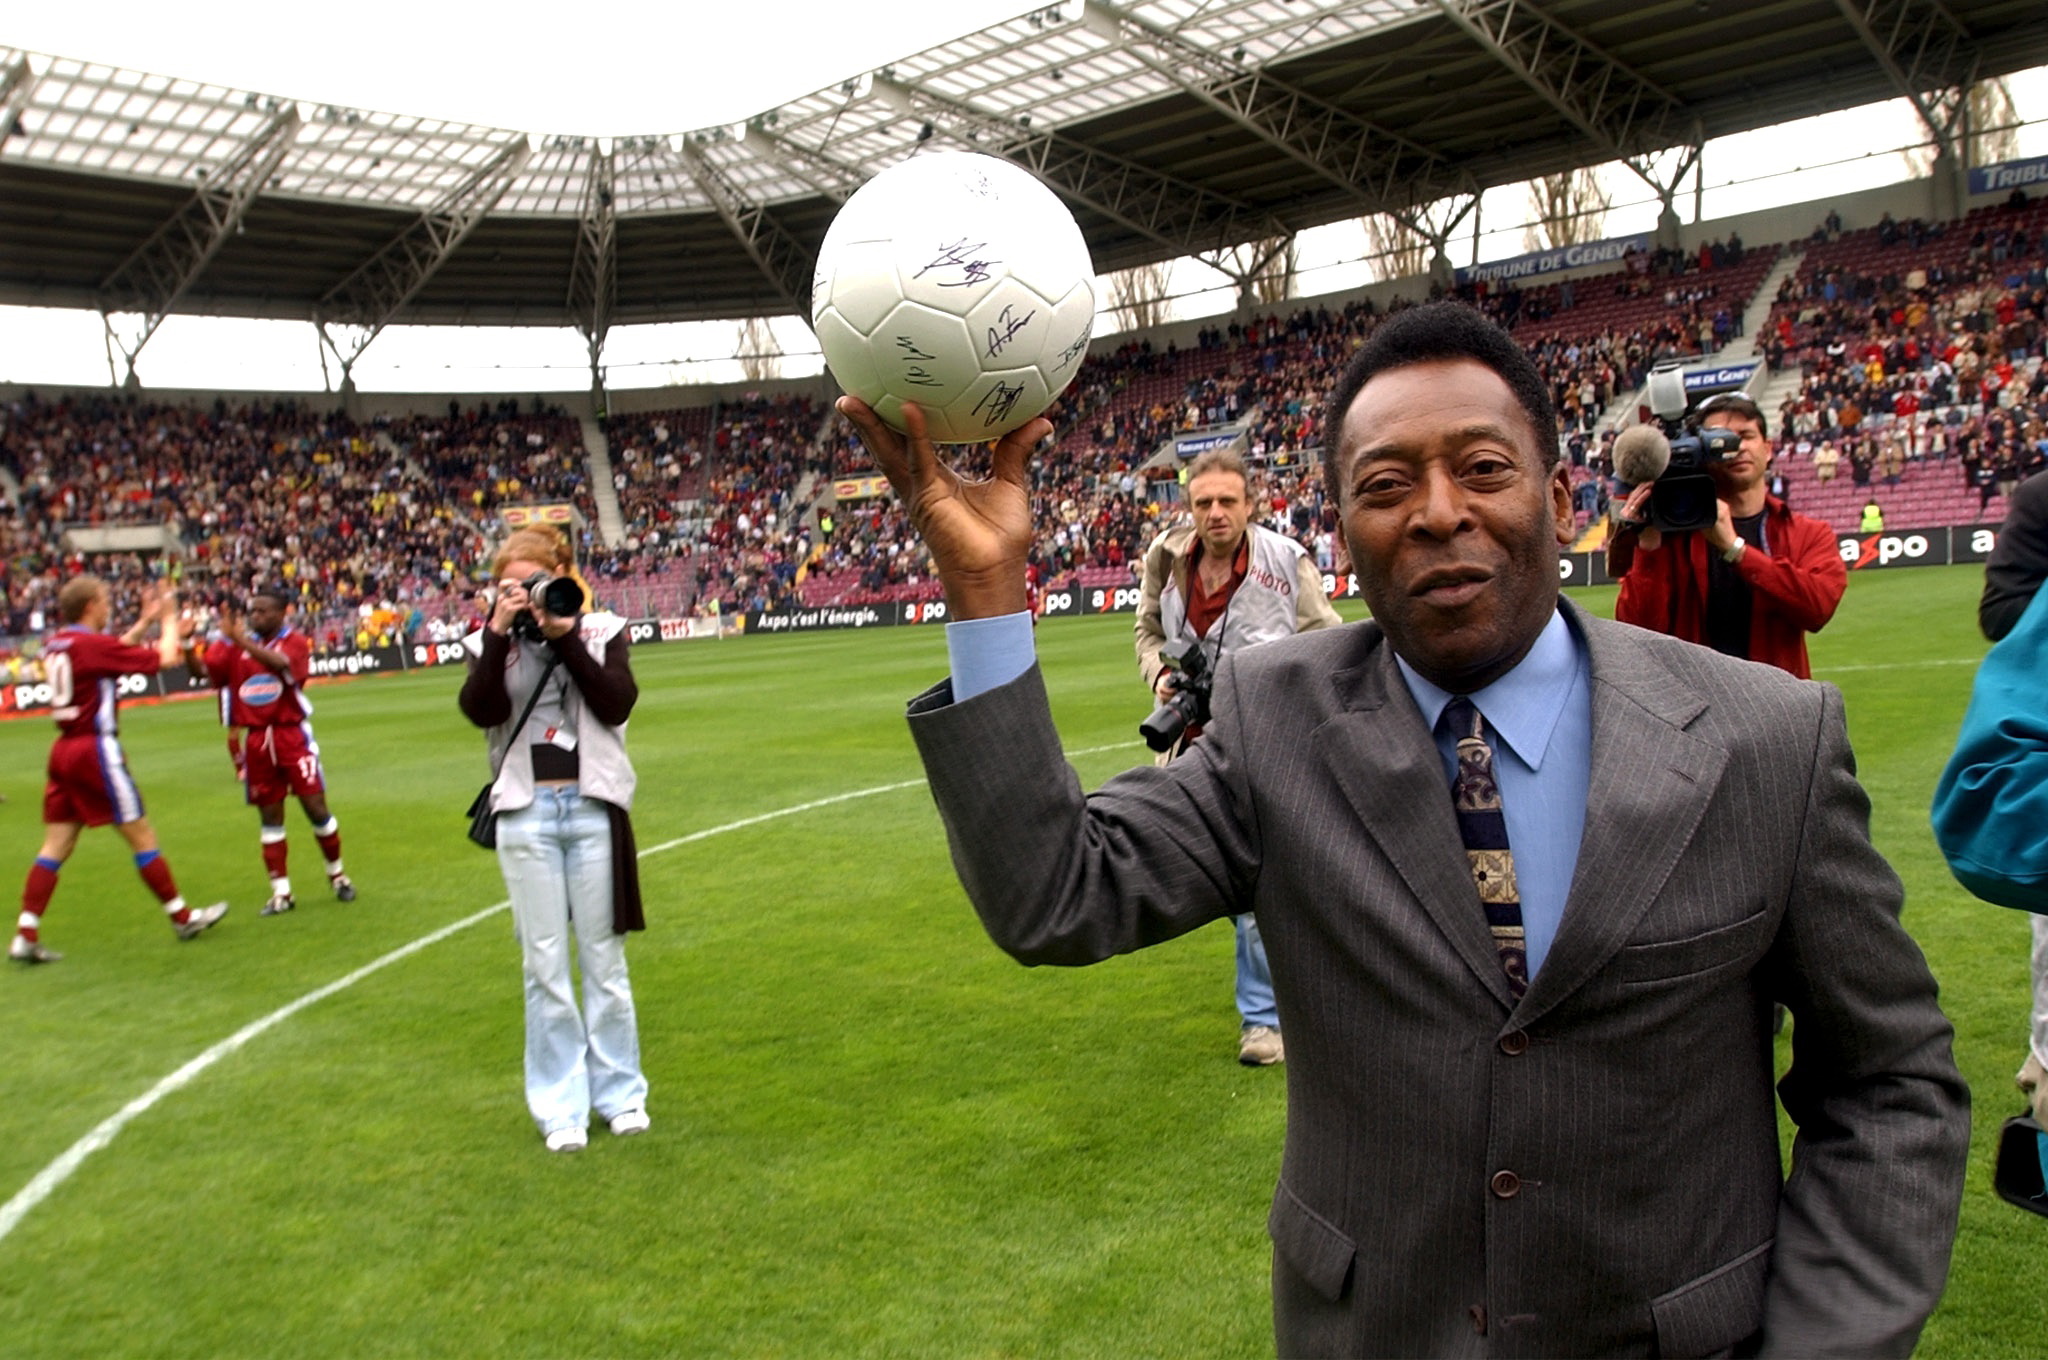 epa10382400 (FILE) - Brazilian soccer legend Pele, whos birth name is Edson Arantes do Nascimento, jokes with photographers before the match between Swiss teams Servette FC and BSC Young Boys, in the Geneva Stadium, in Geneva, Switzerland, 18 April 2004 (issued 30 December 2022). According to his agent, Pele, whose proper name is Edson Arantes do Nascimento, died on 28 December 2022 at age 82.  EPA/LAURENT GILLIERON